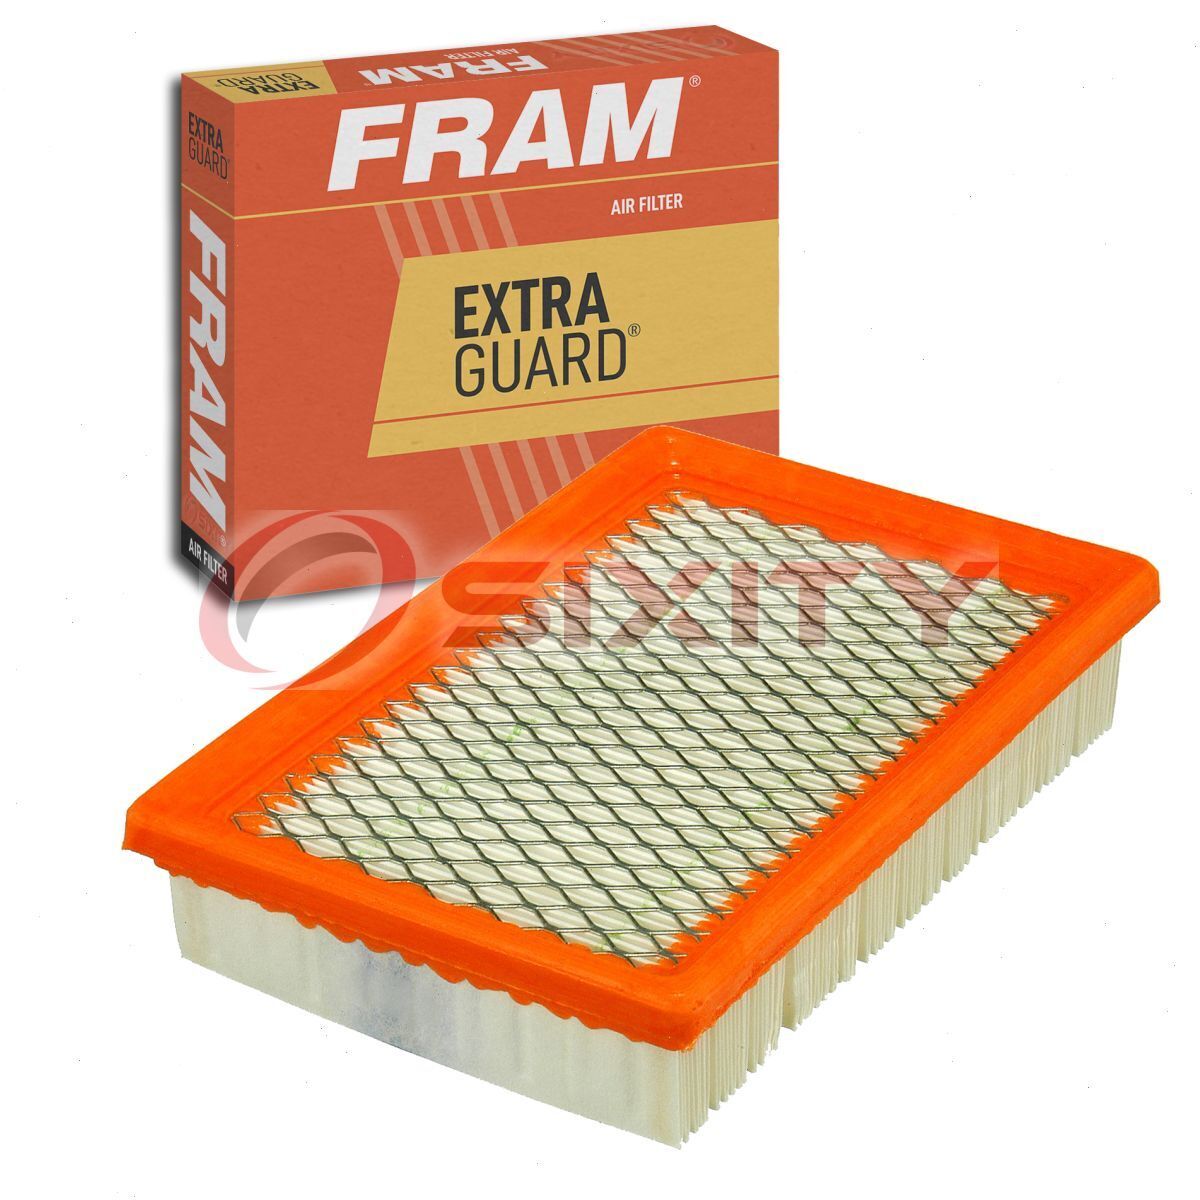 FRAM Extra Guard Air Filter for 1983-1988 Plymouth Caravelle 2.2L L4 Intake sx